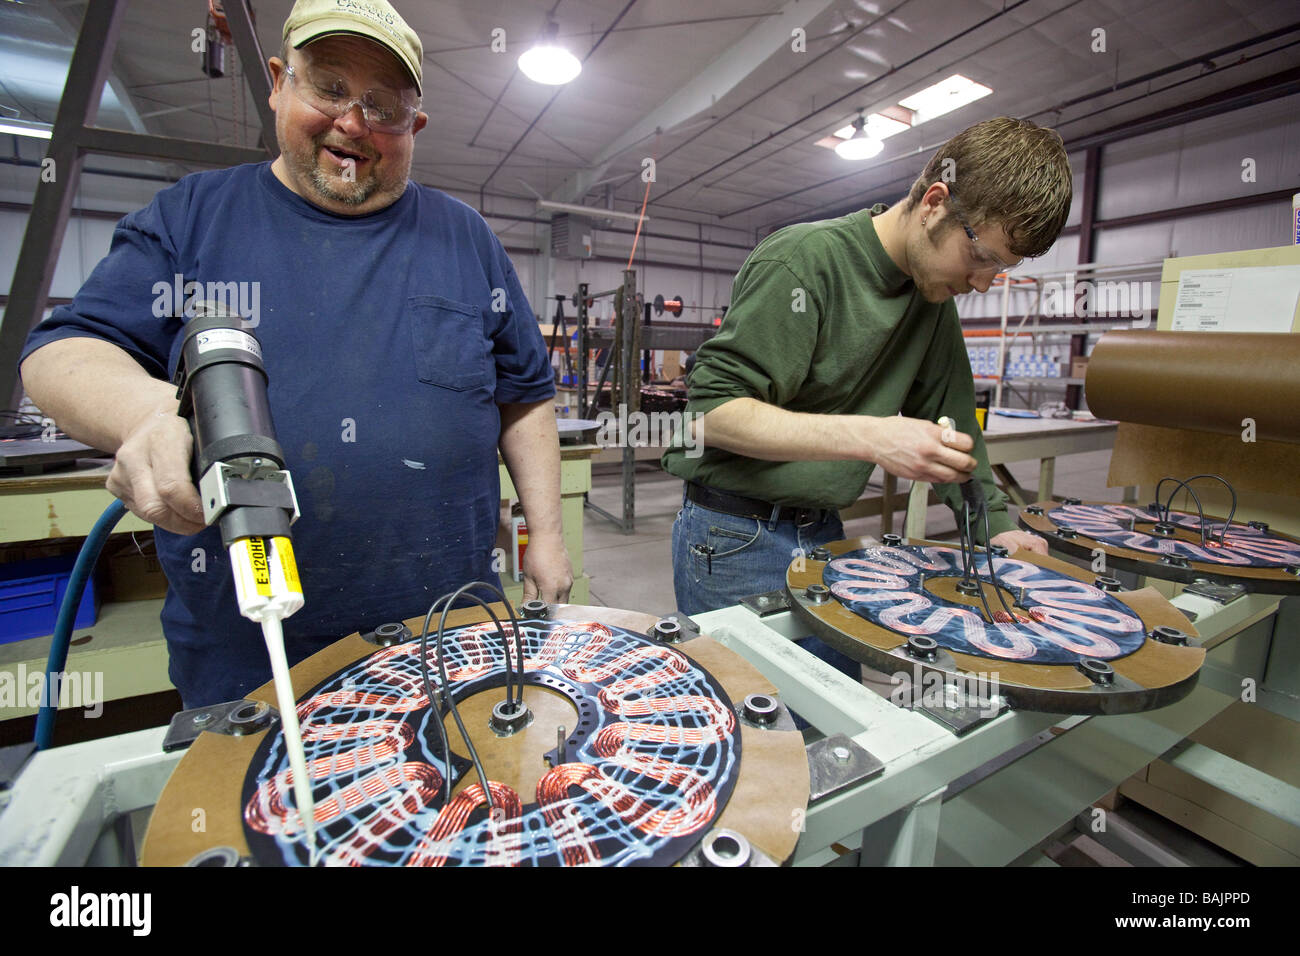 Workers manufacture Windspire wind turbines in a former auto parts factory. Stock Photo